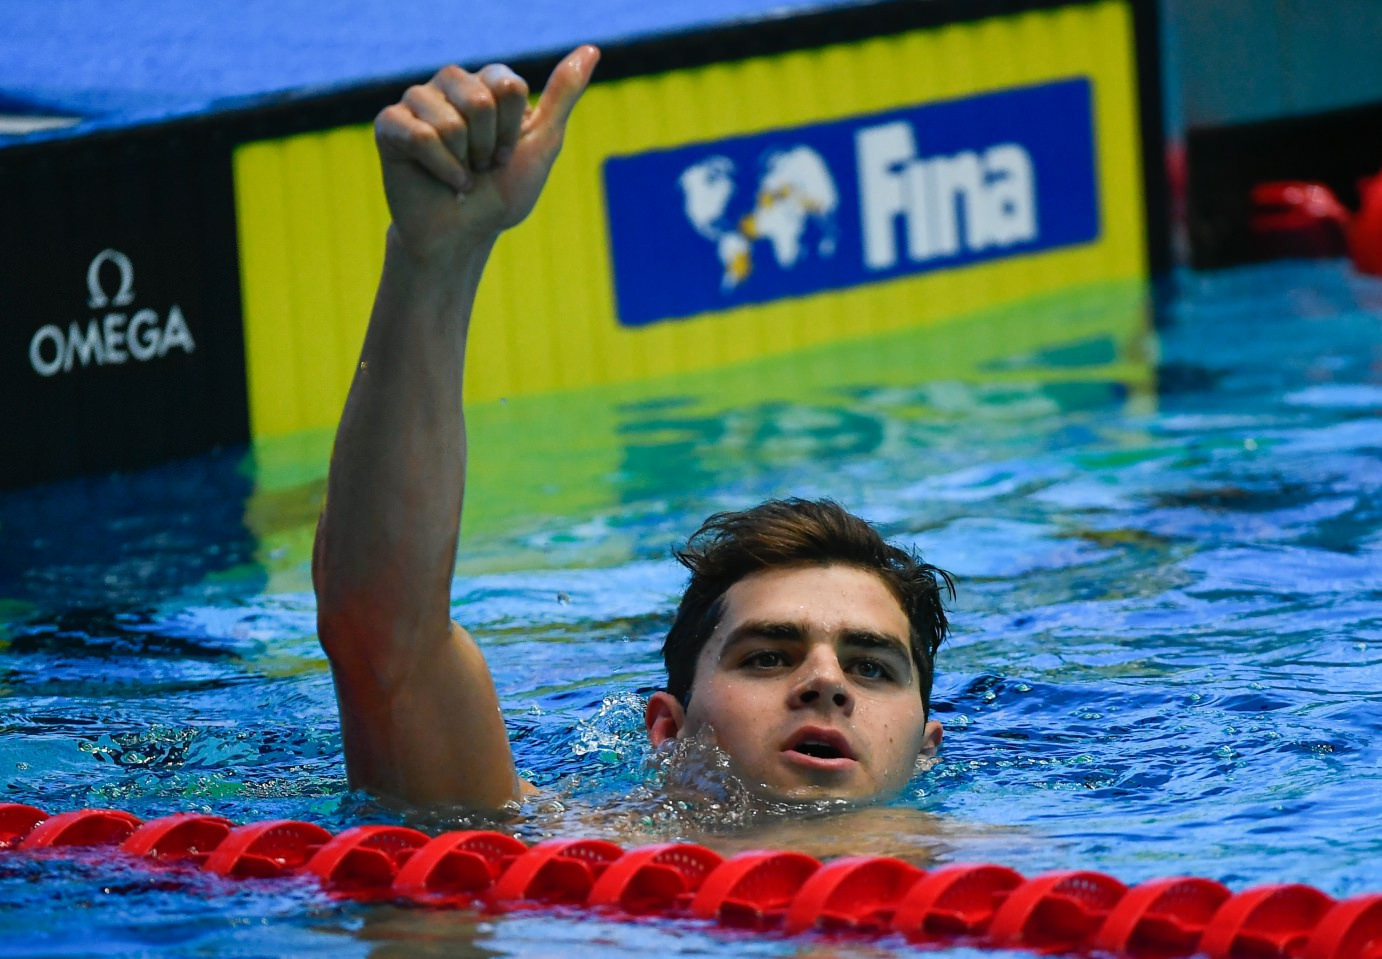 Andrew breaks another world record to win third gold medal at FINA World Junior Swimming Championships